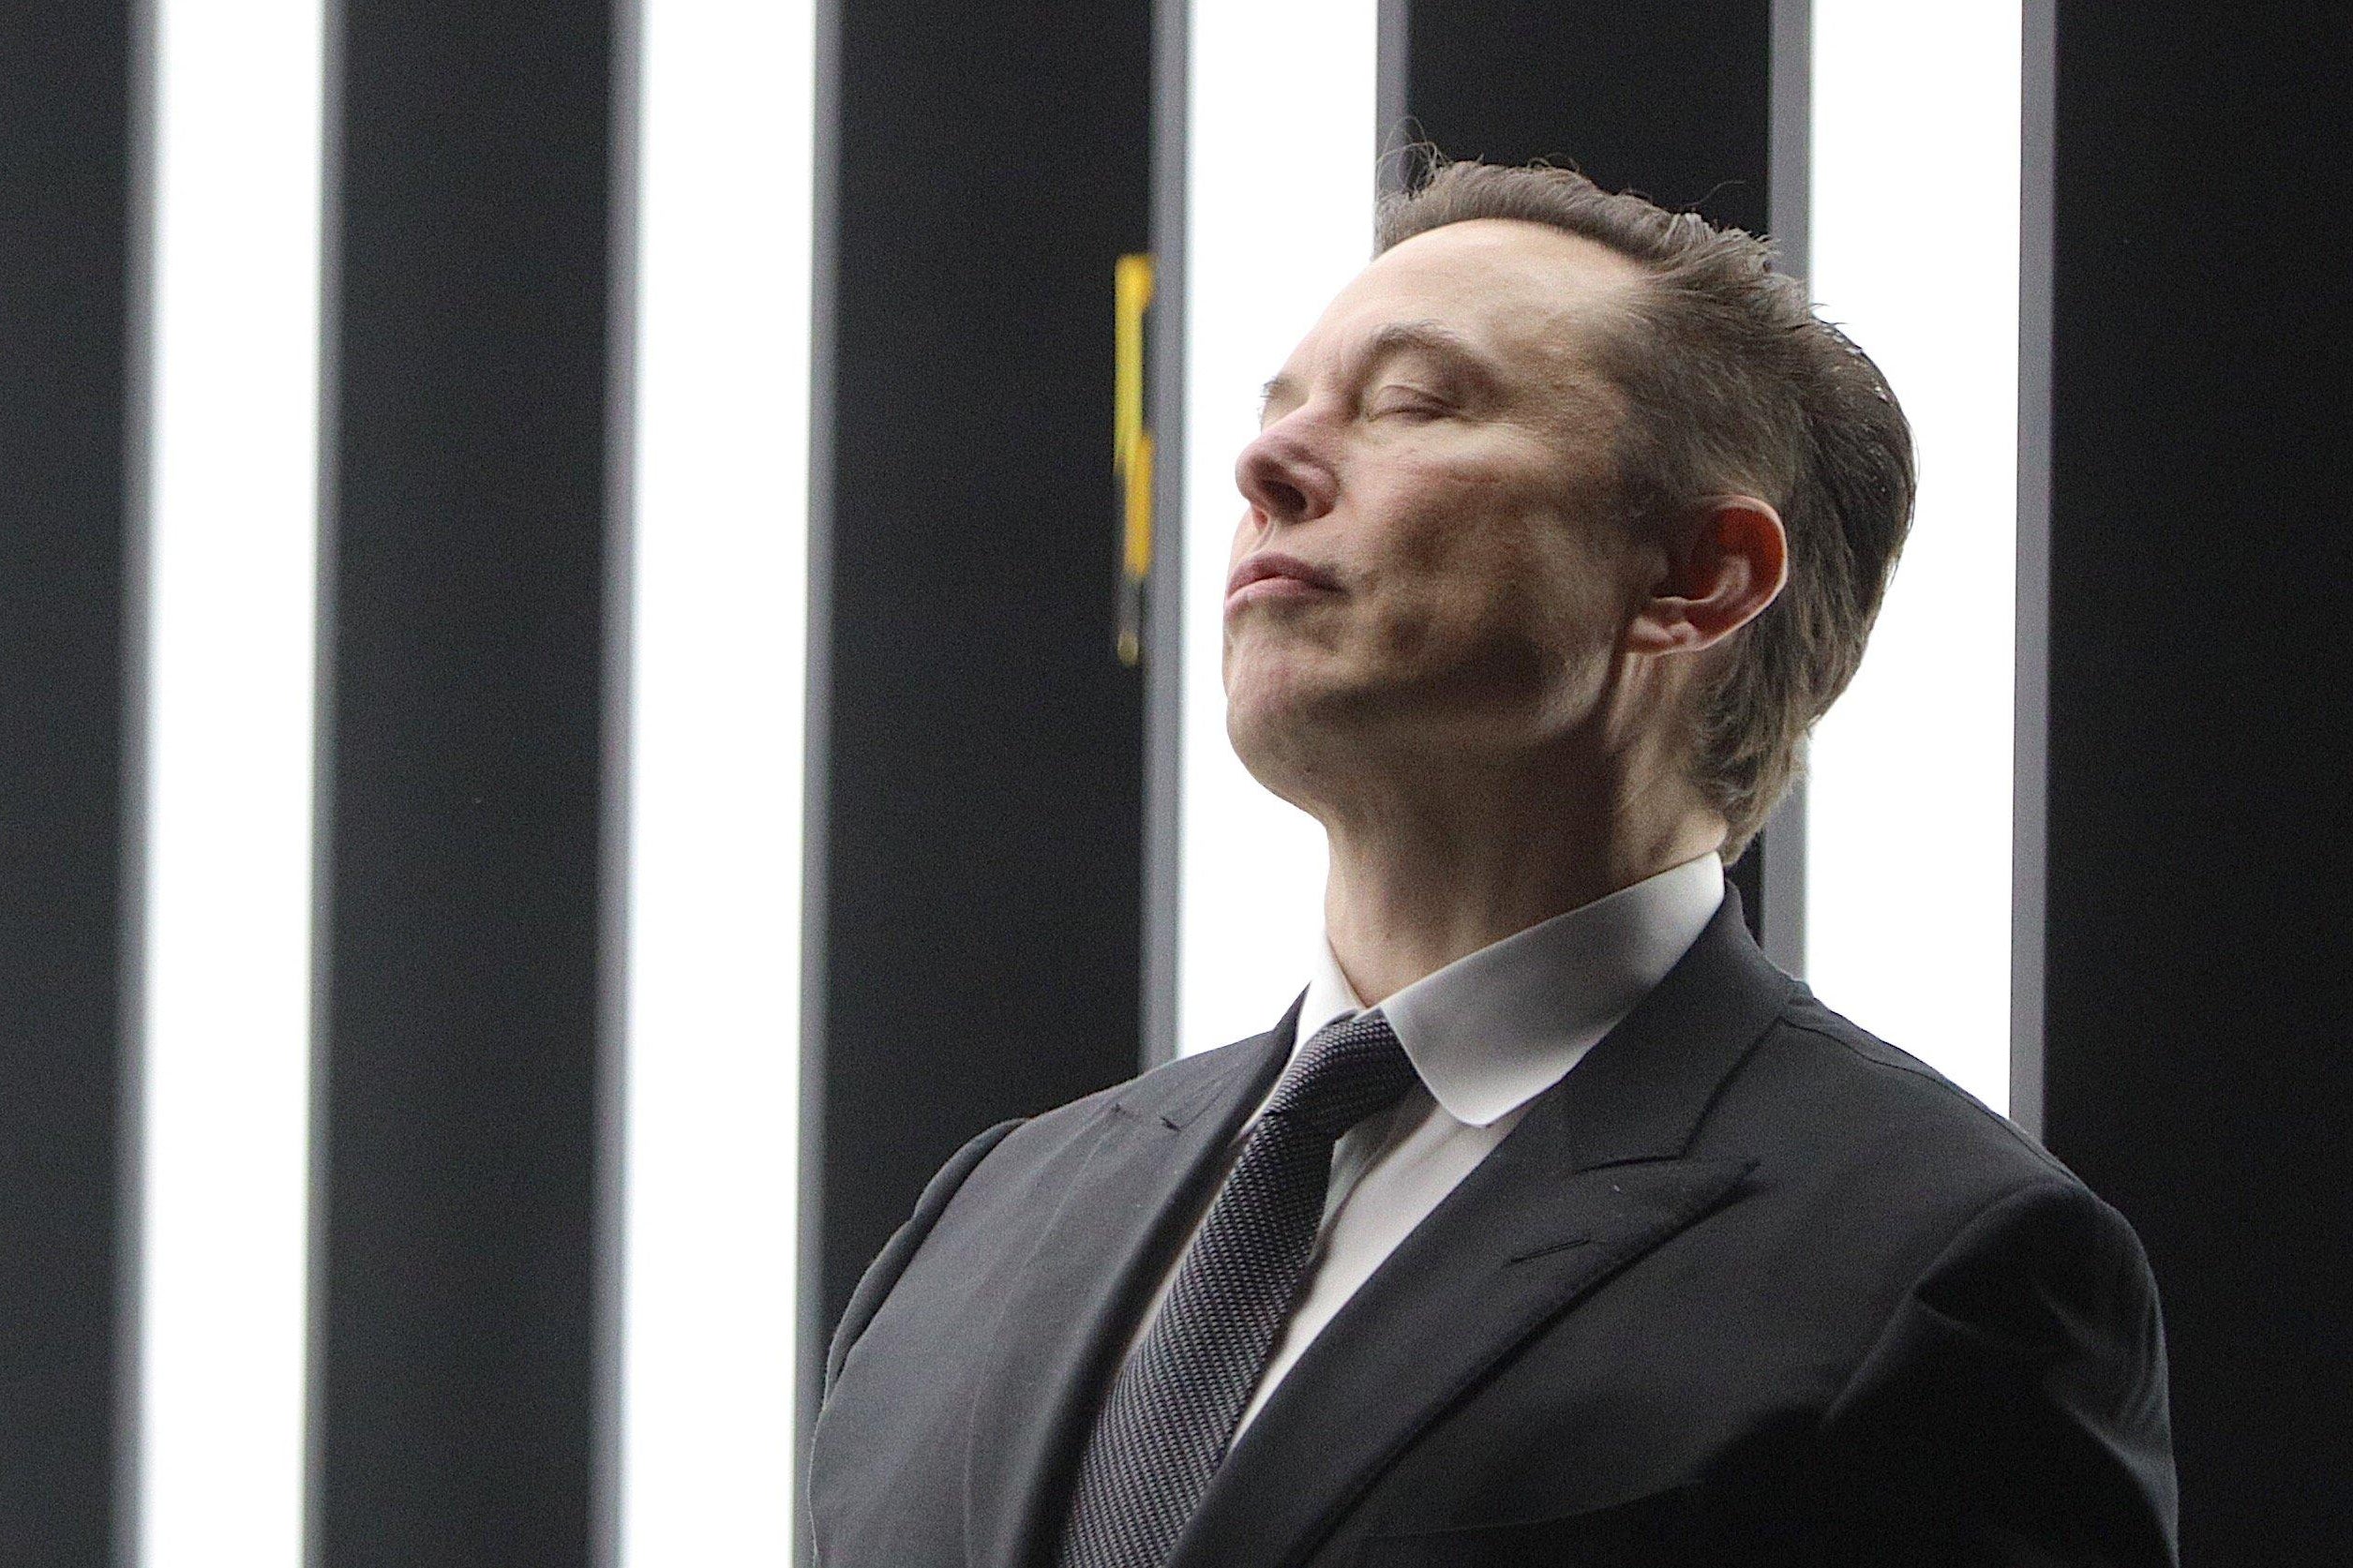 Tesla CEO Elon Musk  leans against a wall with his eyes closed.